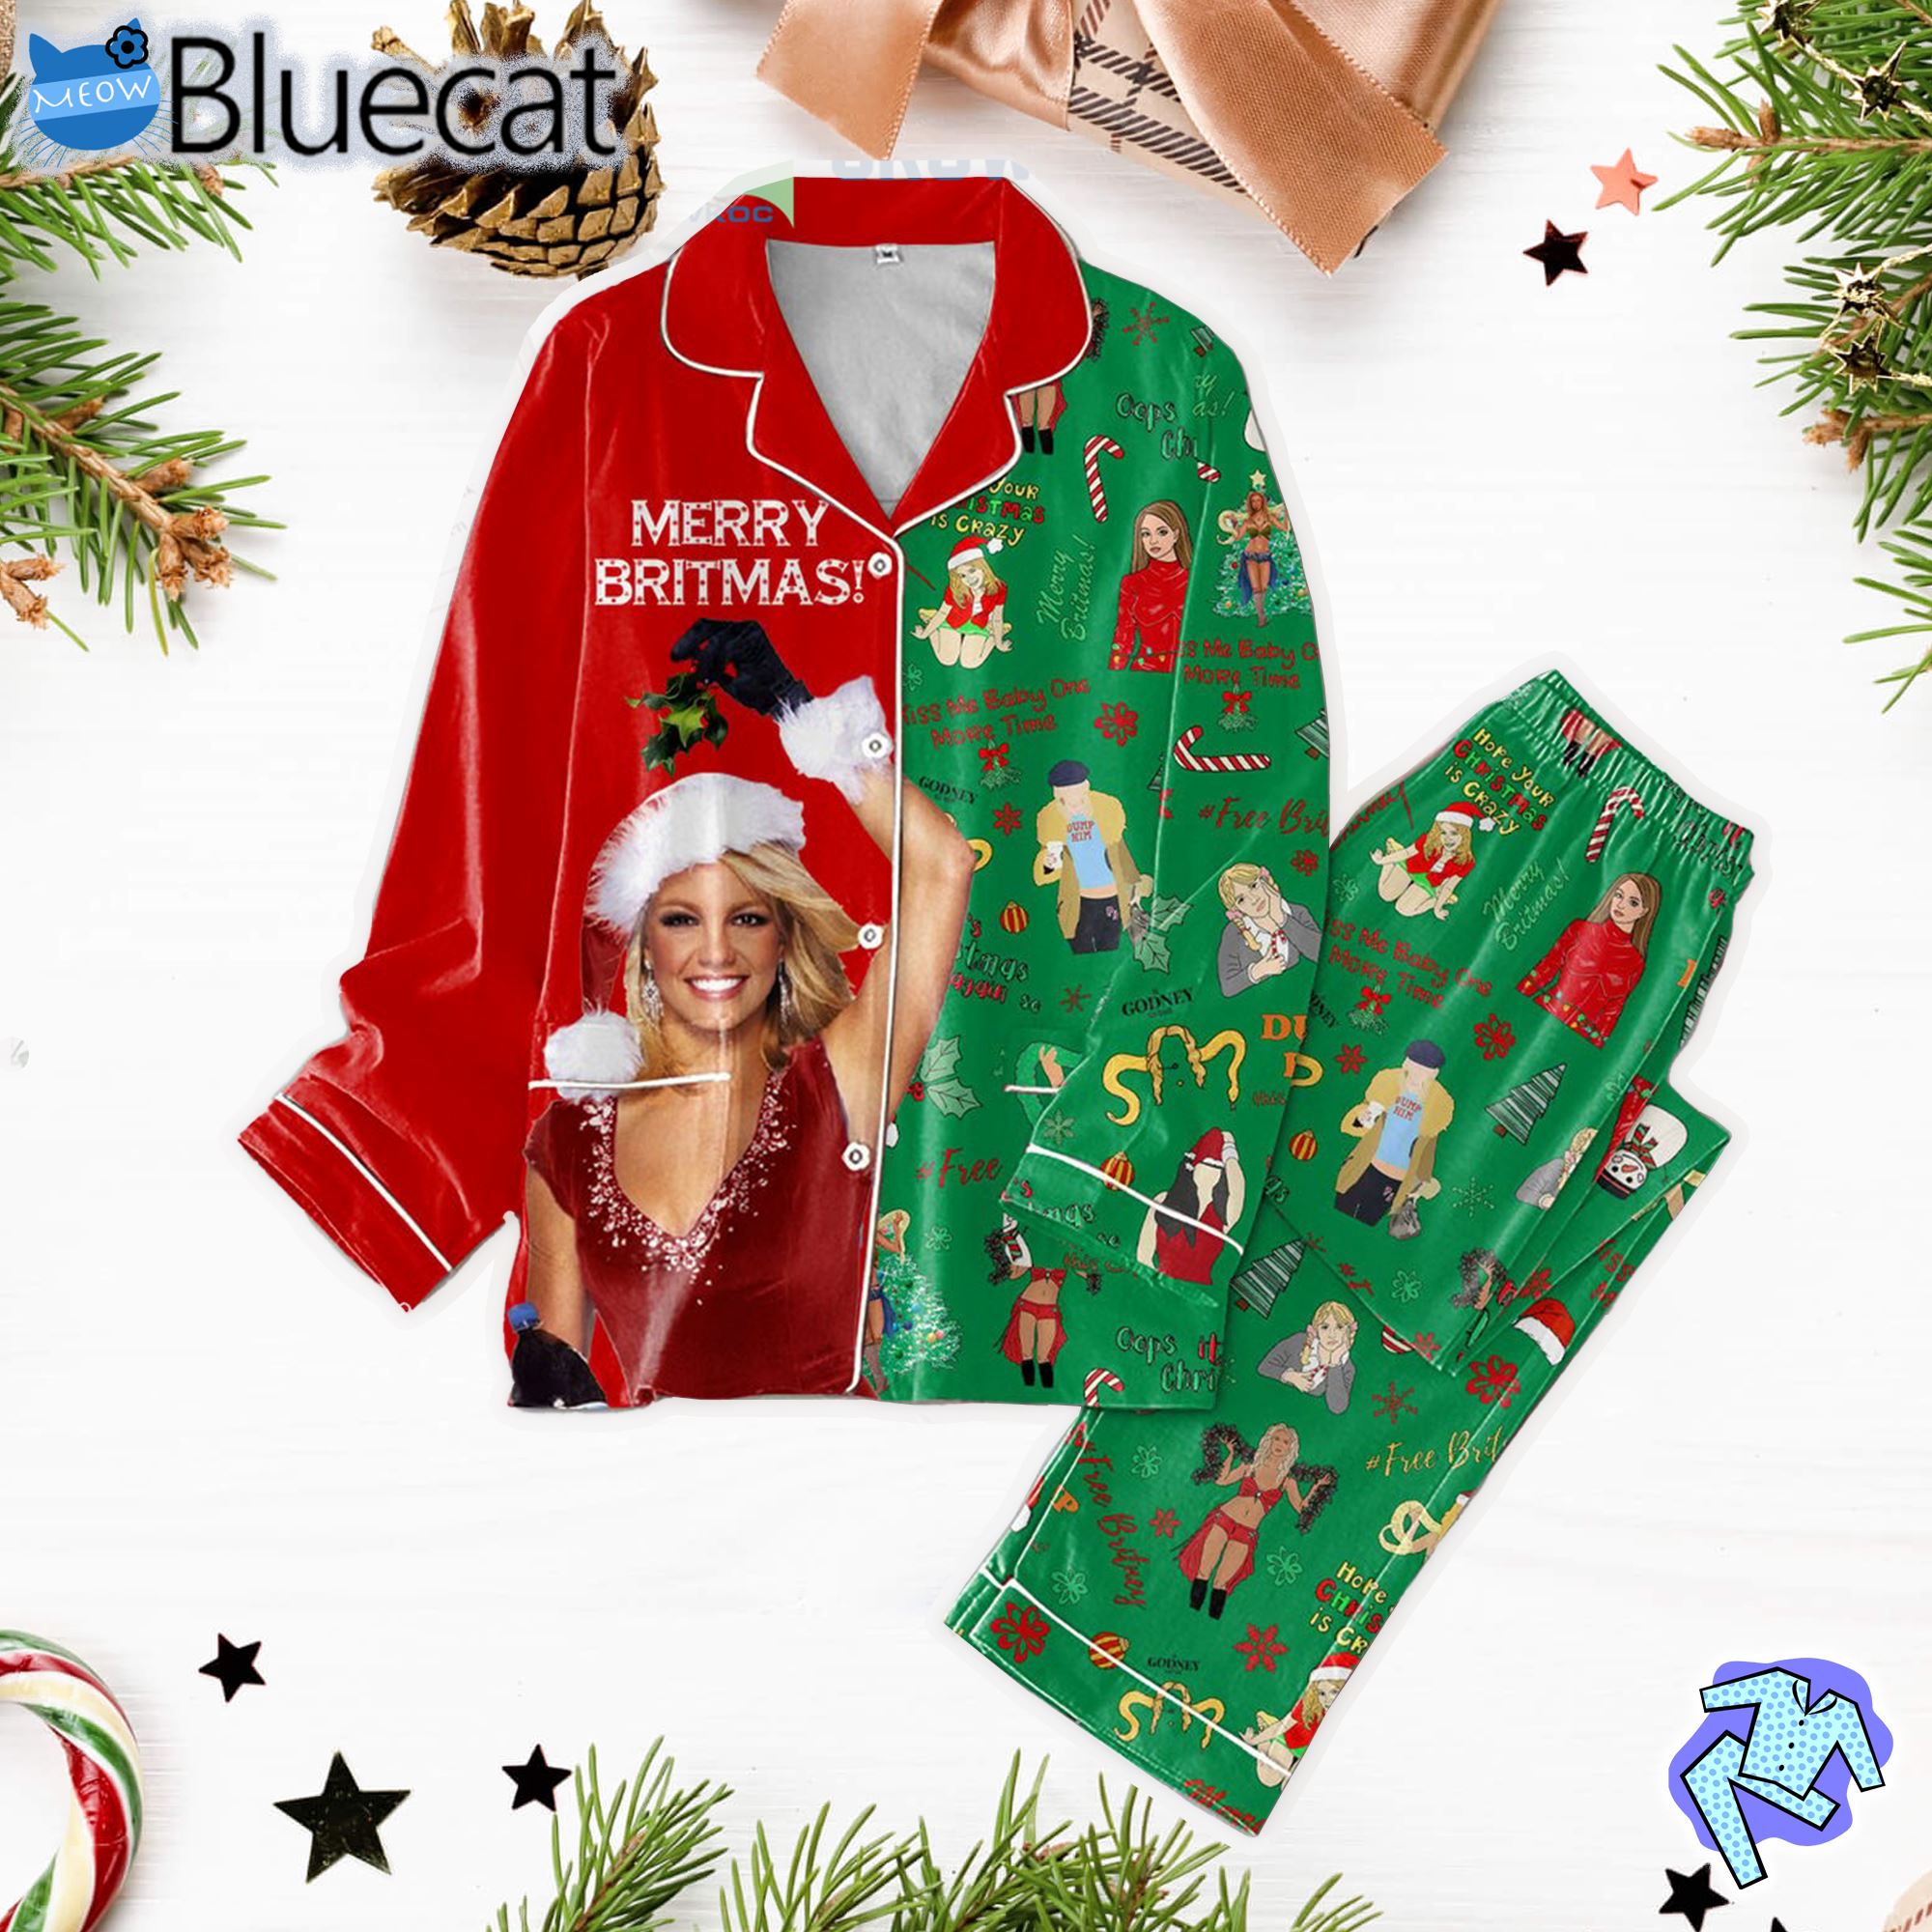 Britney Spears Kiss Me Baby One More Time Pajamas Set 